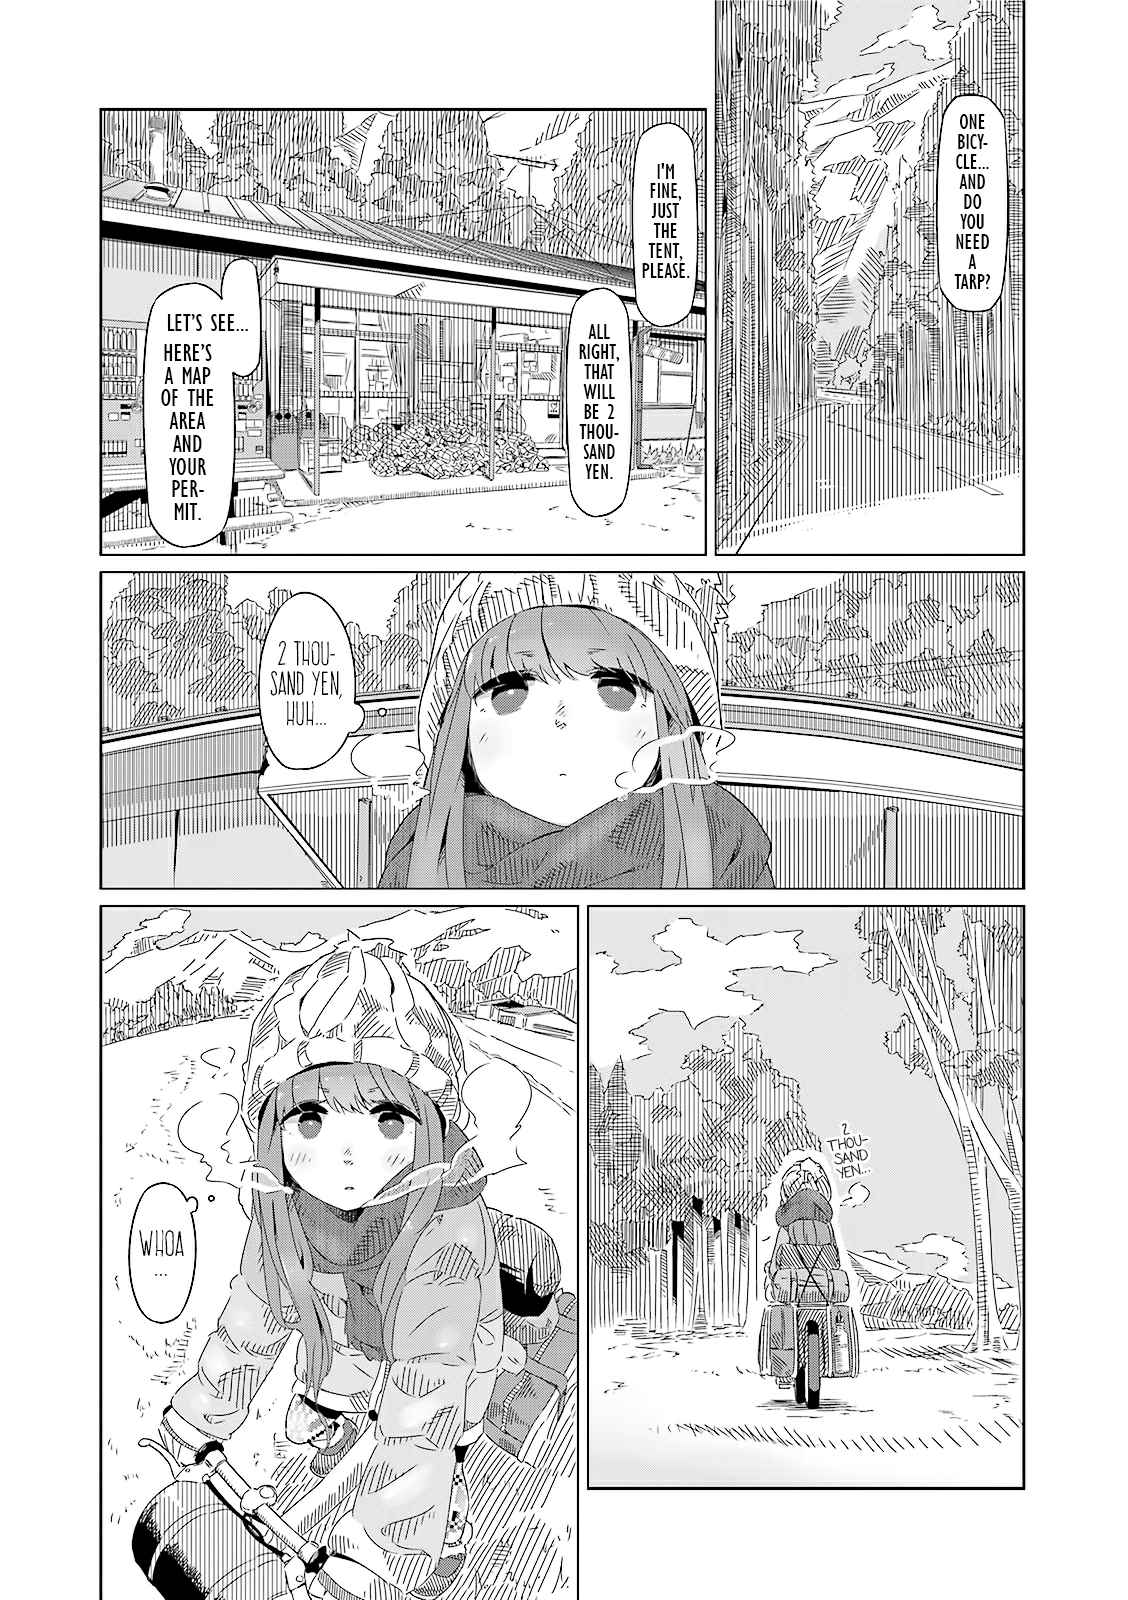 Yurucamp △ Vol. 1 Ch. 3 She Camps Alone at the Base